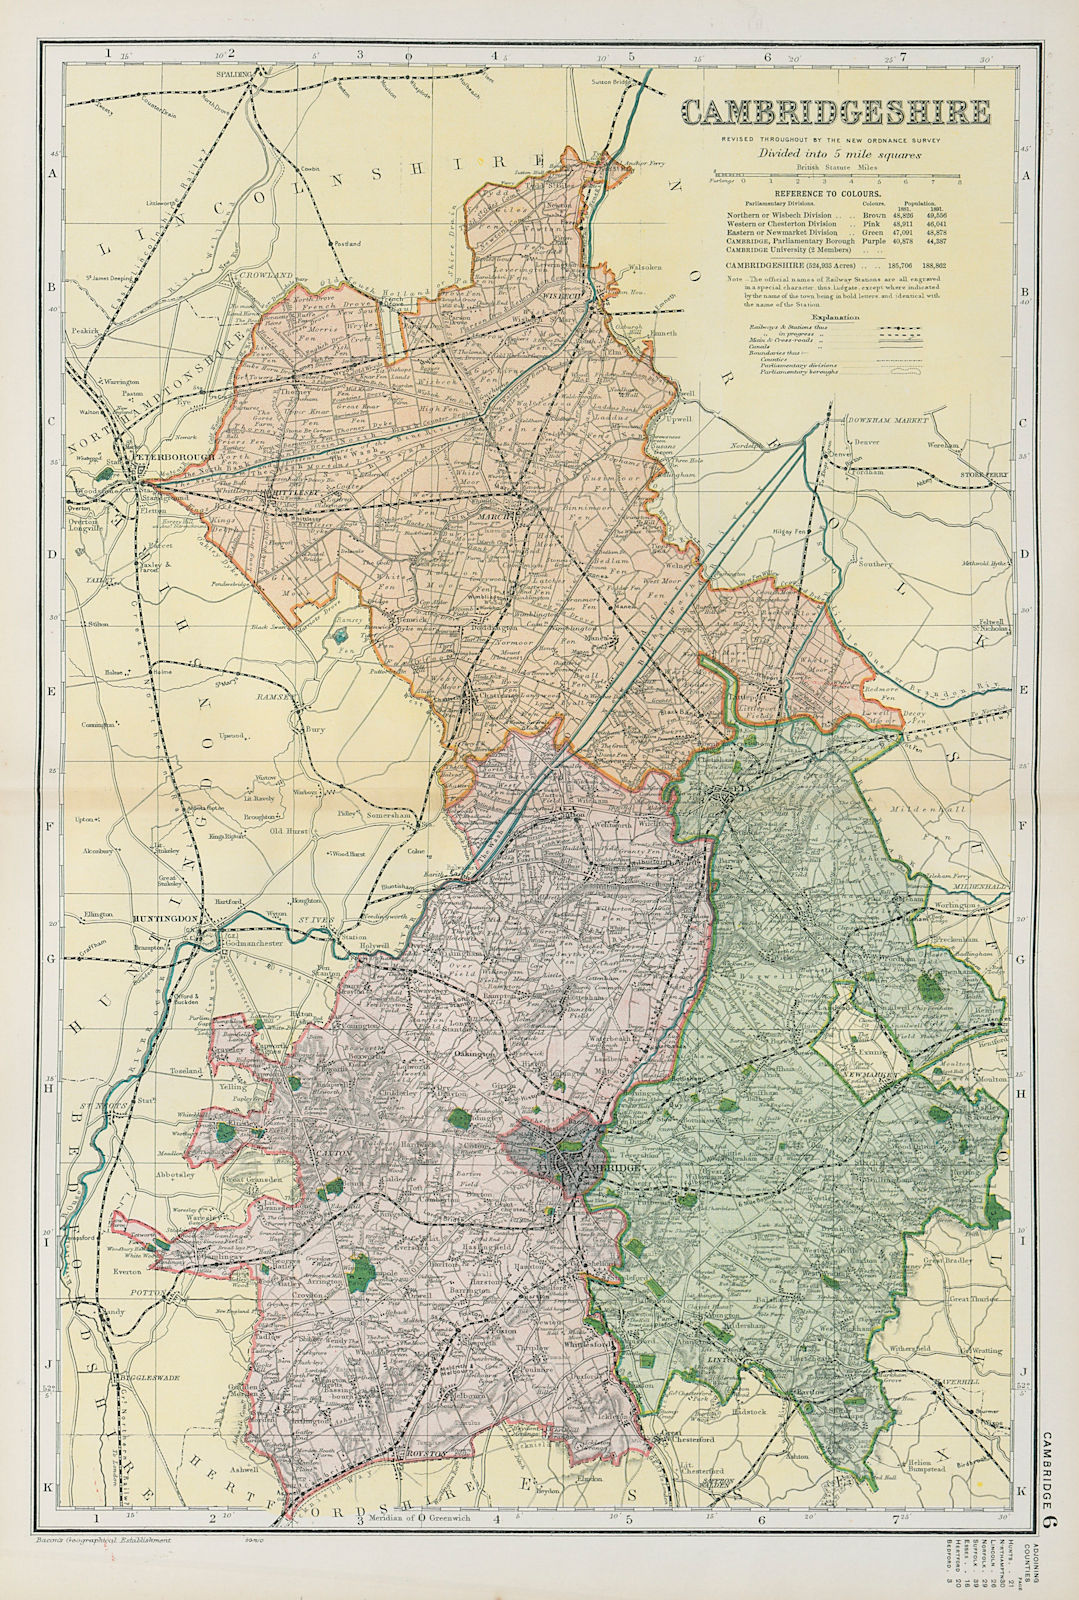 Associate Product CAMBRIDGESHIRE.Showing Parliamentary divisions,boroughs & parks.BACON 1900 map